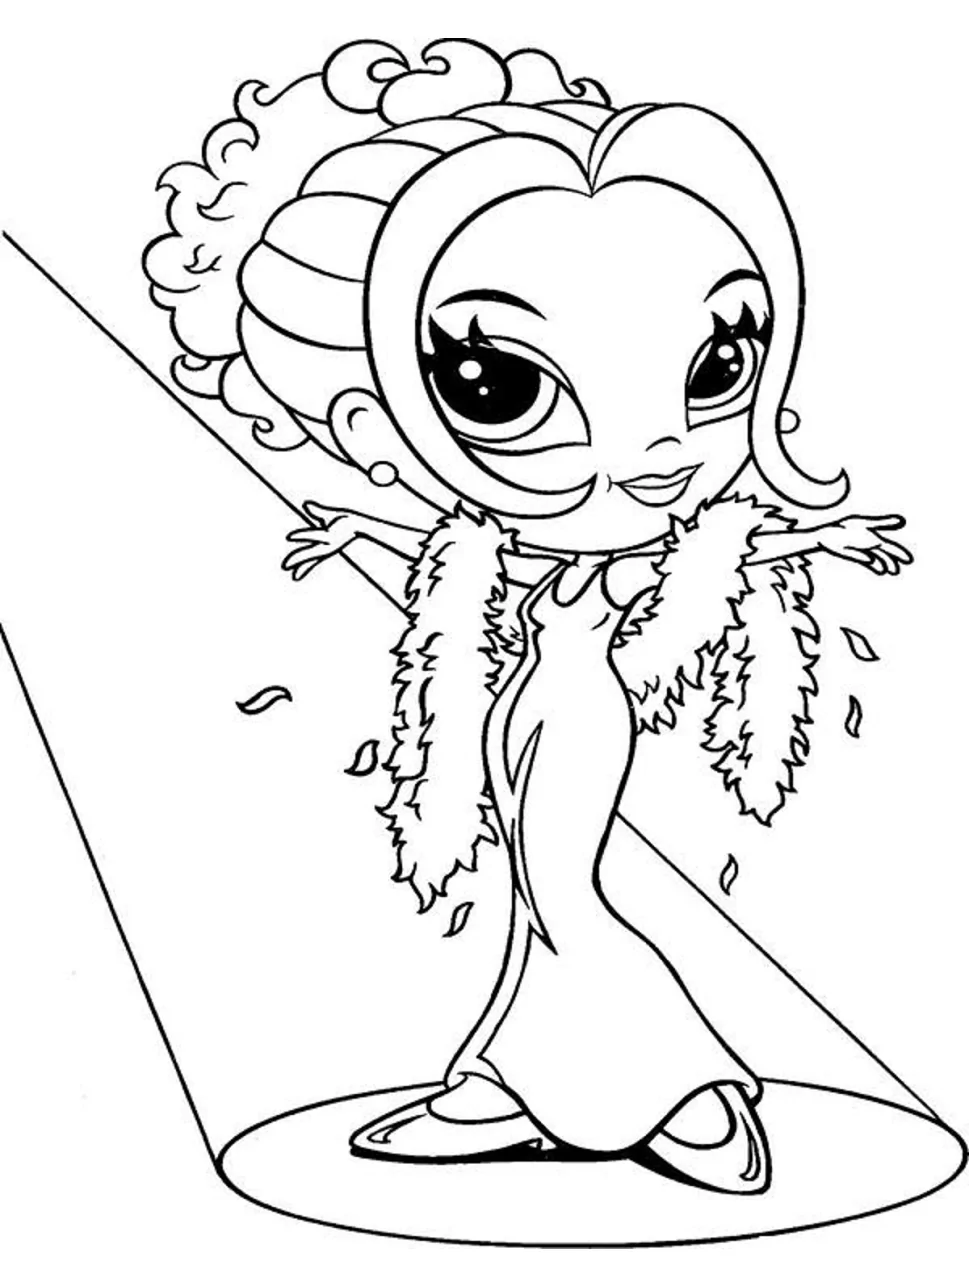 Beautiful Glamour Girl Coloring Page - Free Printable Coloring Pages ...